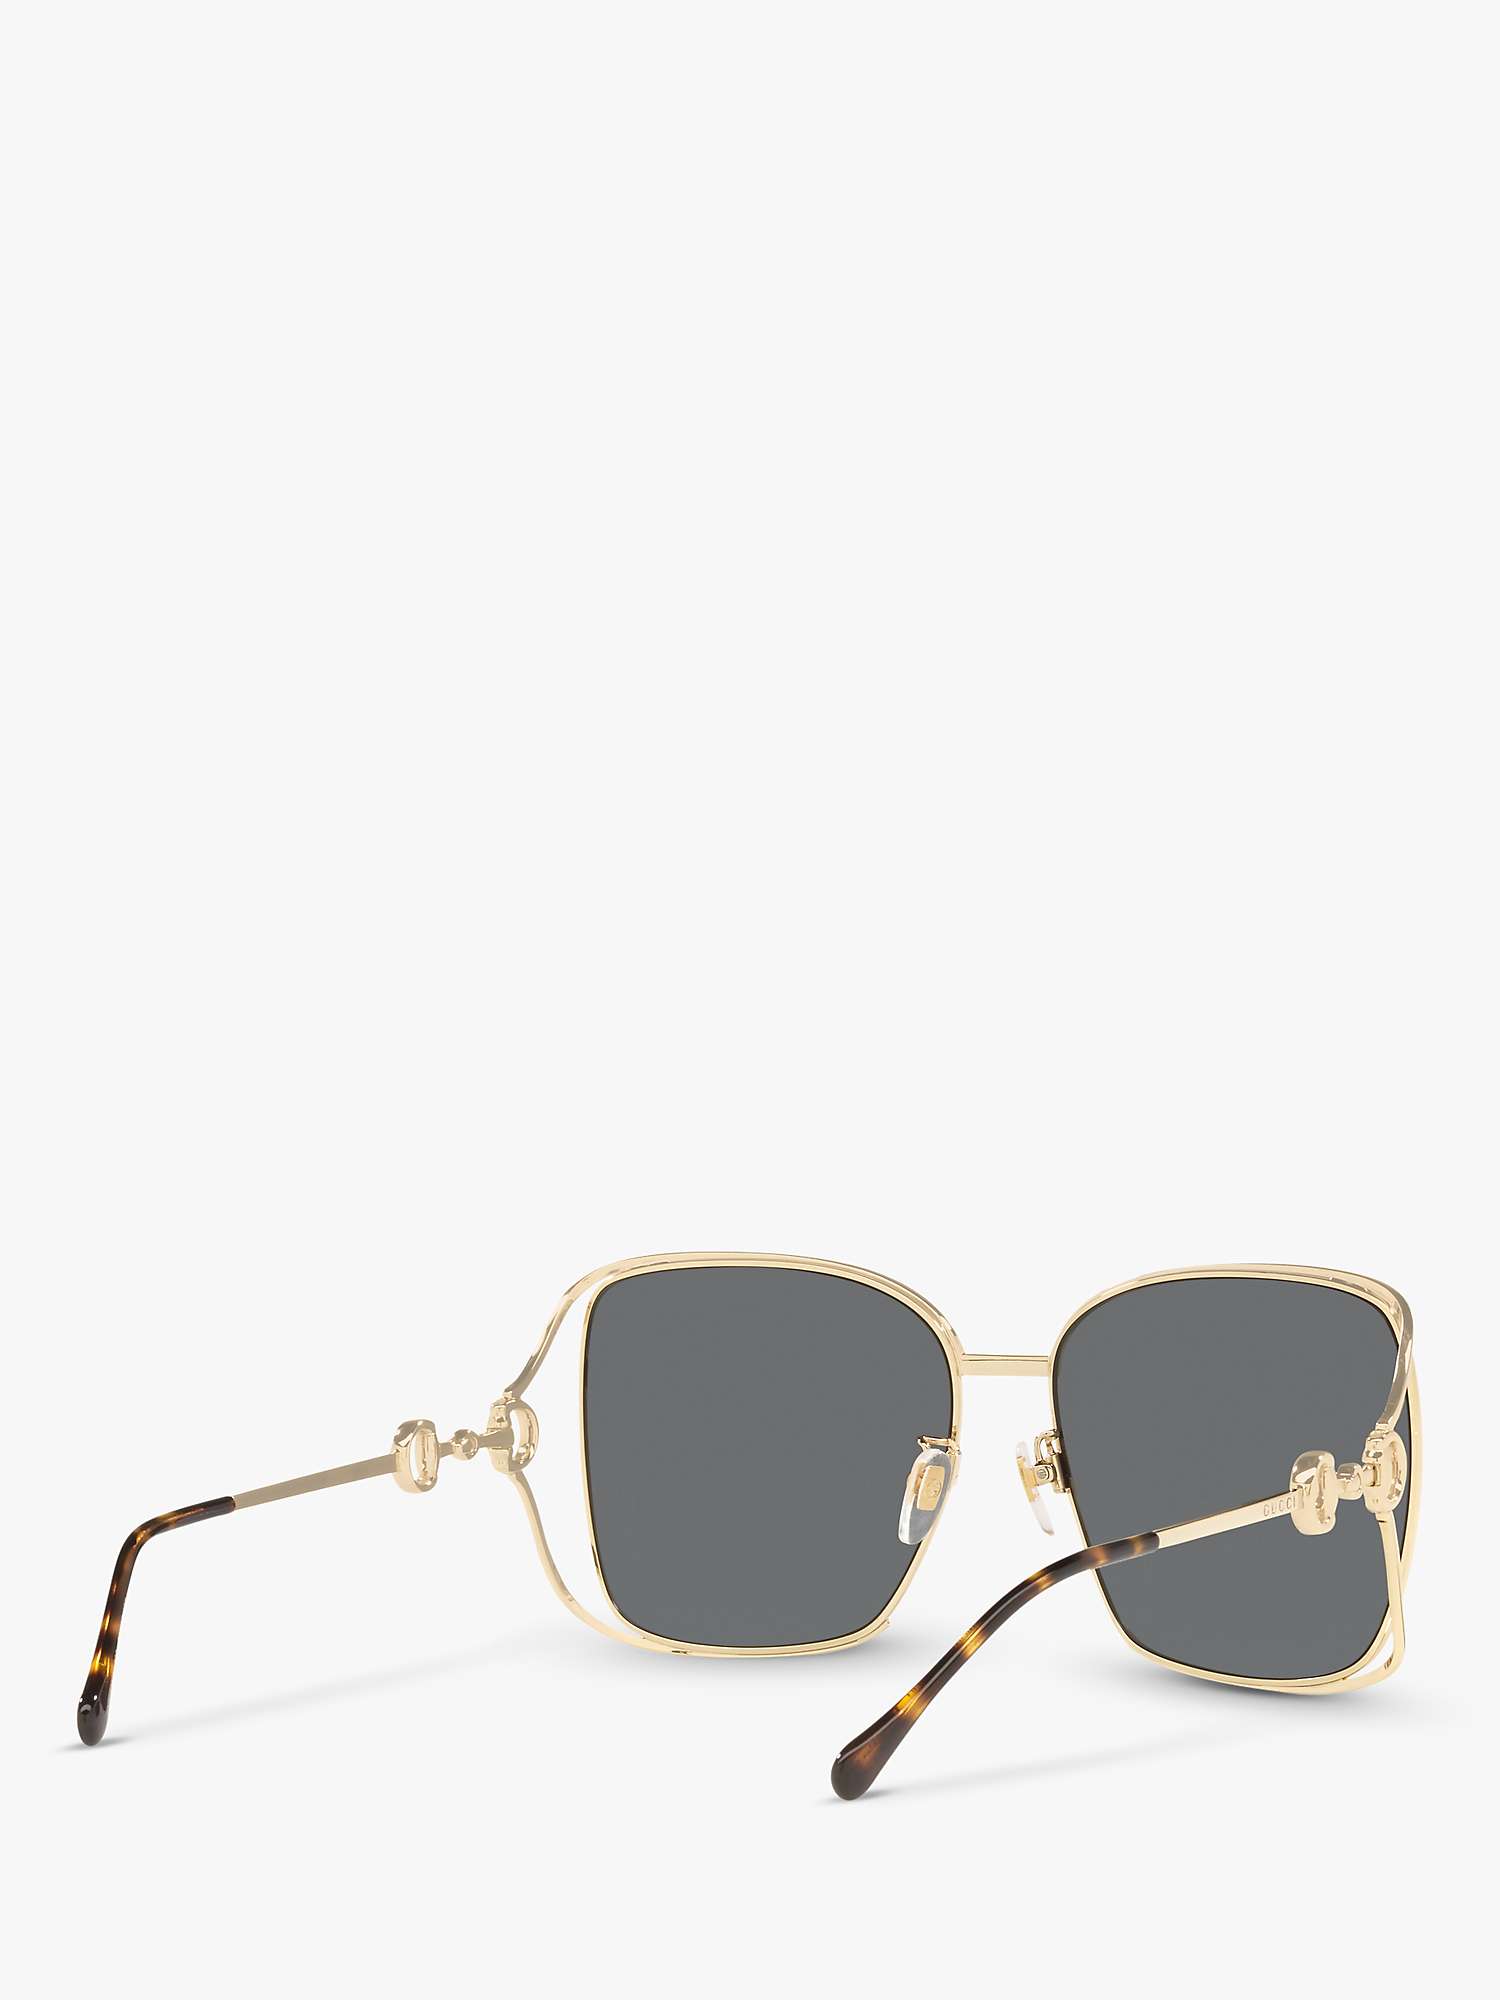 Buy Gucci GG1020S Women's Square Sunglasses, Gold/Grey Online at johnlewis.com